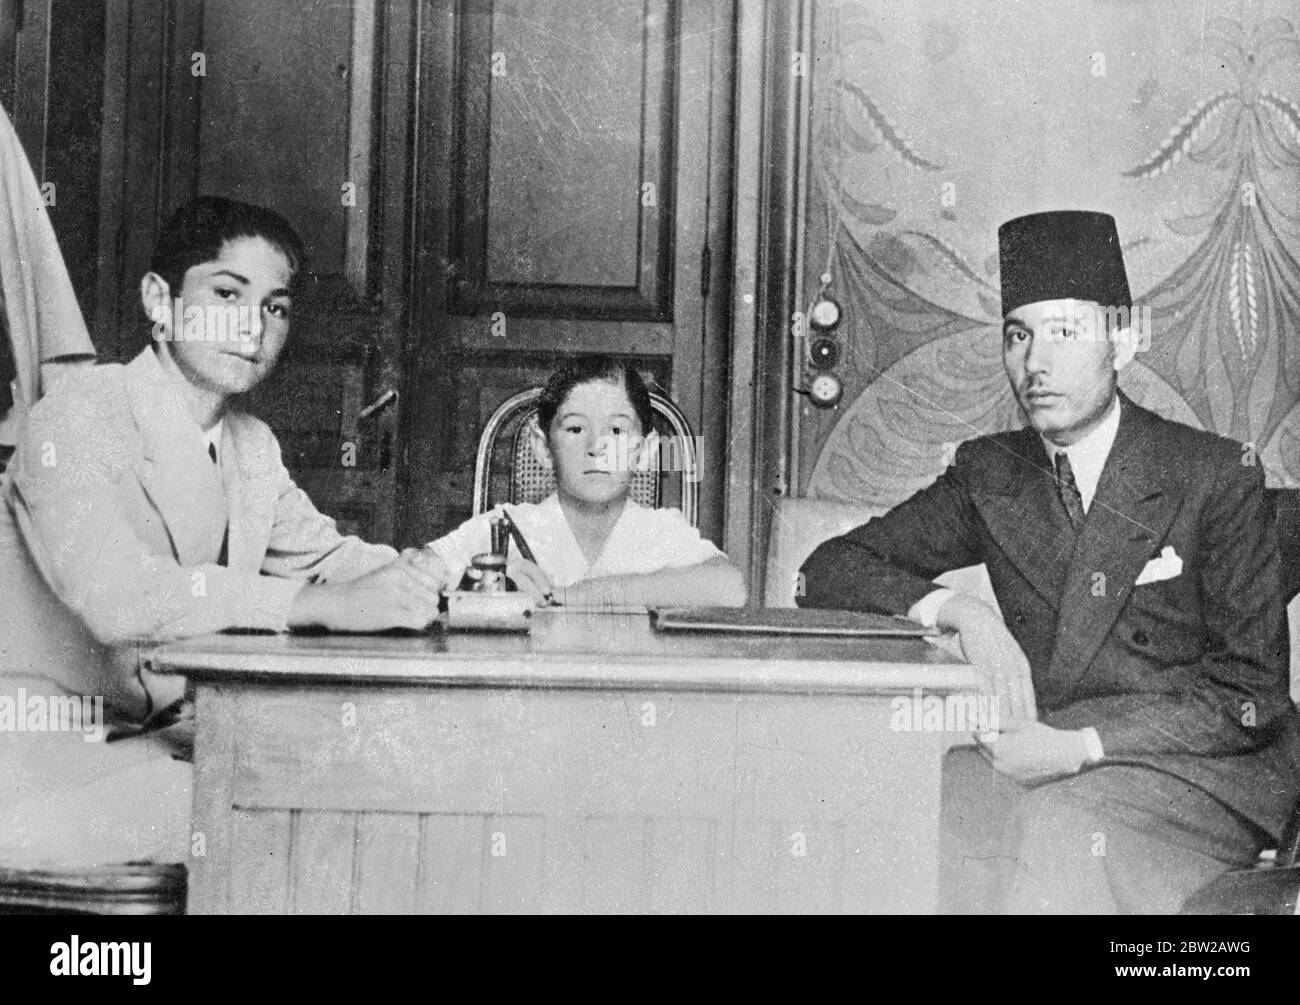 Brothers of King Farouk's fiancee wedding in January. The brothers of Mlle Farida Zulficar, fiancee of the young King Farouk of Egypt, with their private tutor. The wedding of the boy king will take place in the first week of January 1938, at Montaza Palace, his summer residence near Alexandria. Stock Photo